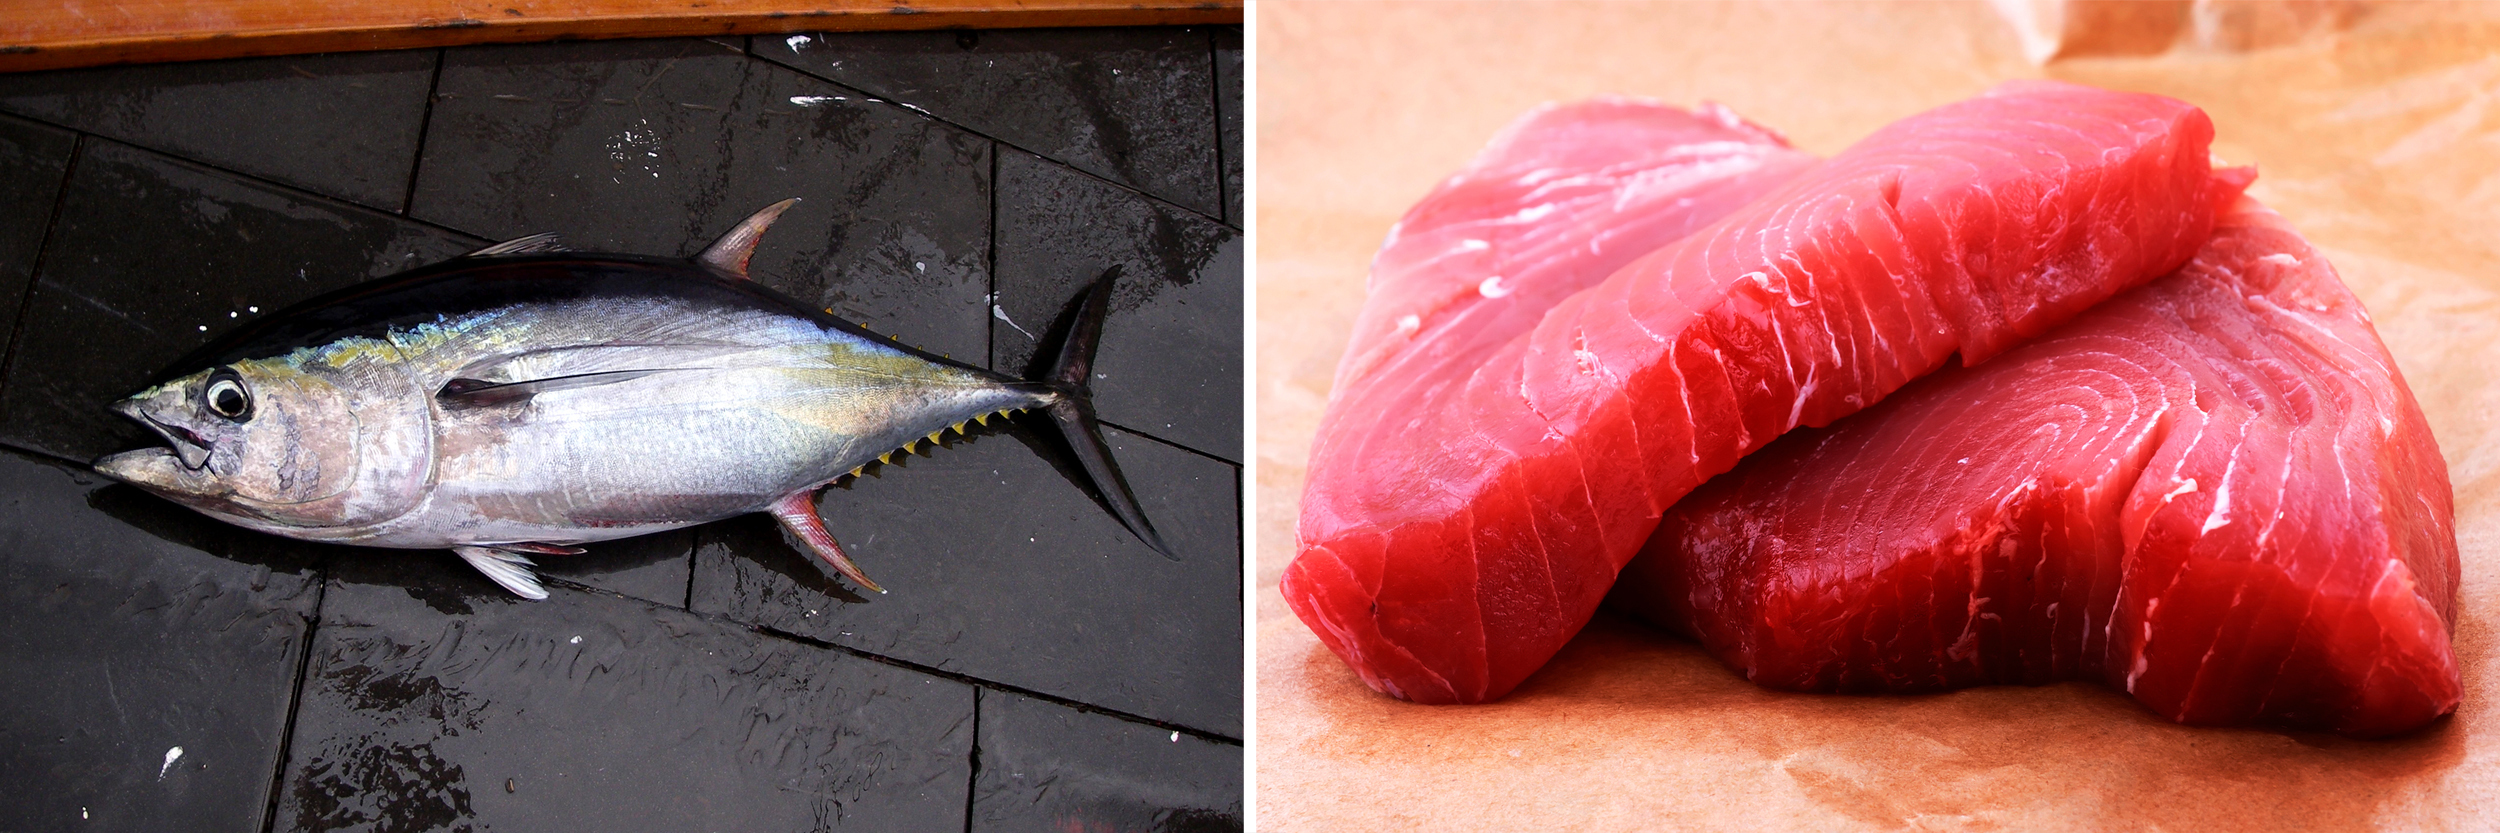 A yellowfin tuna caught in the Gulf of Mexico; a yellowfin tuna steak. Photos: NOAA/Flickr;Chang/iStockphoto